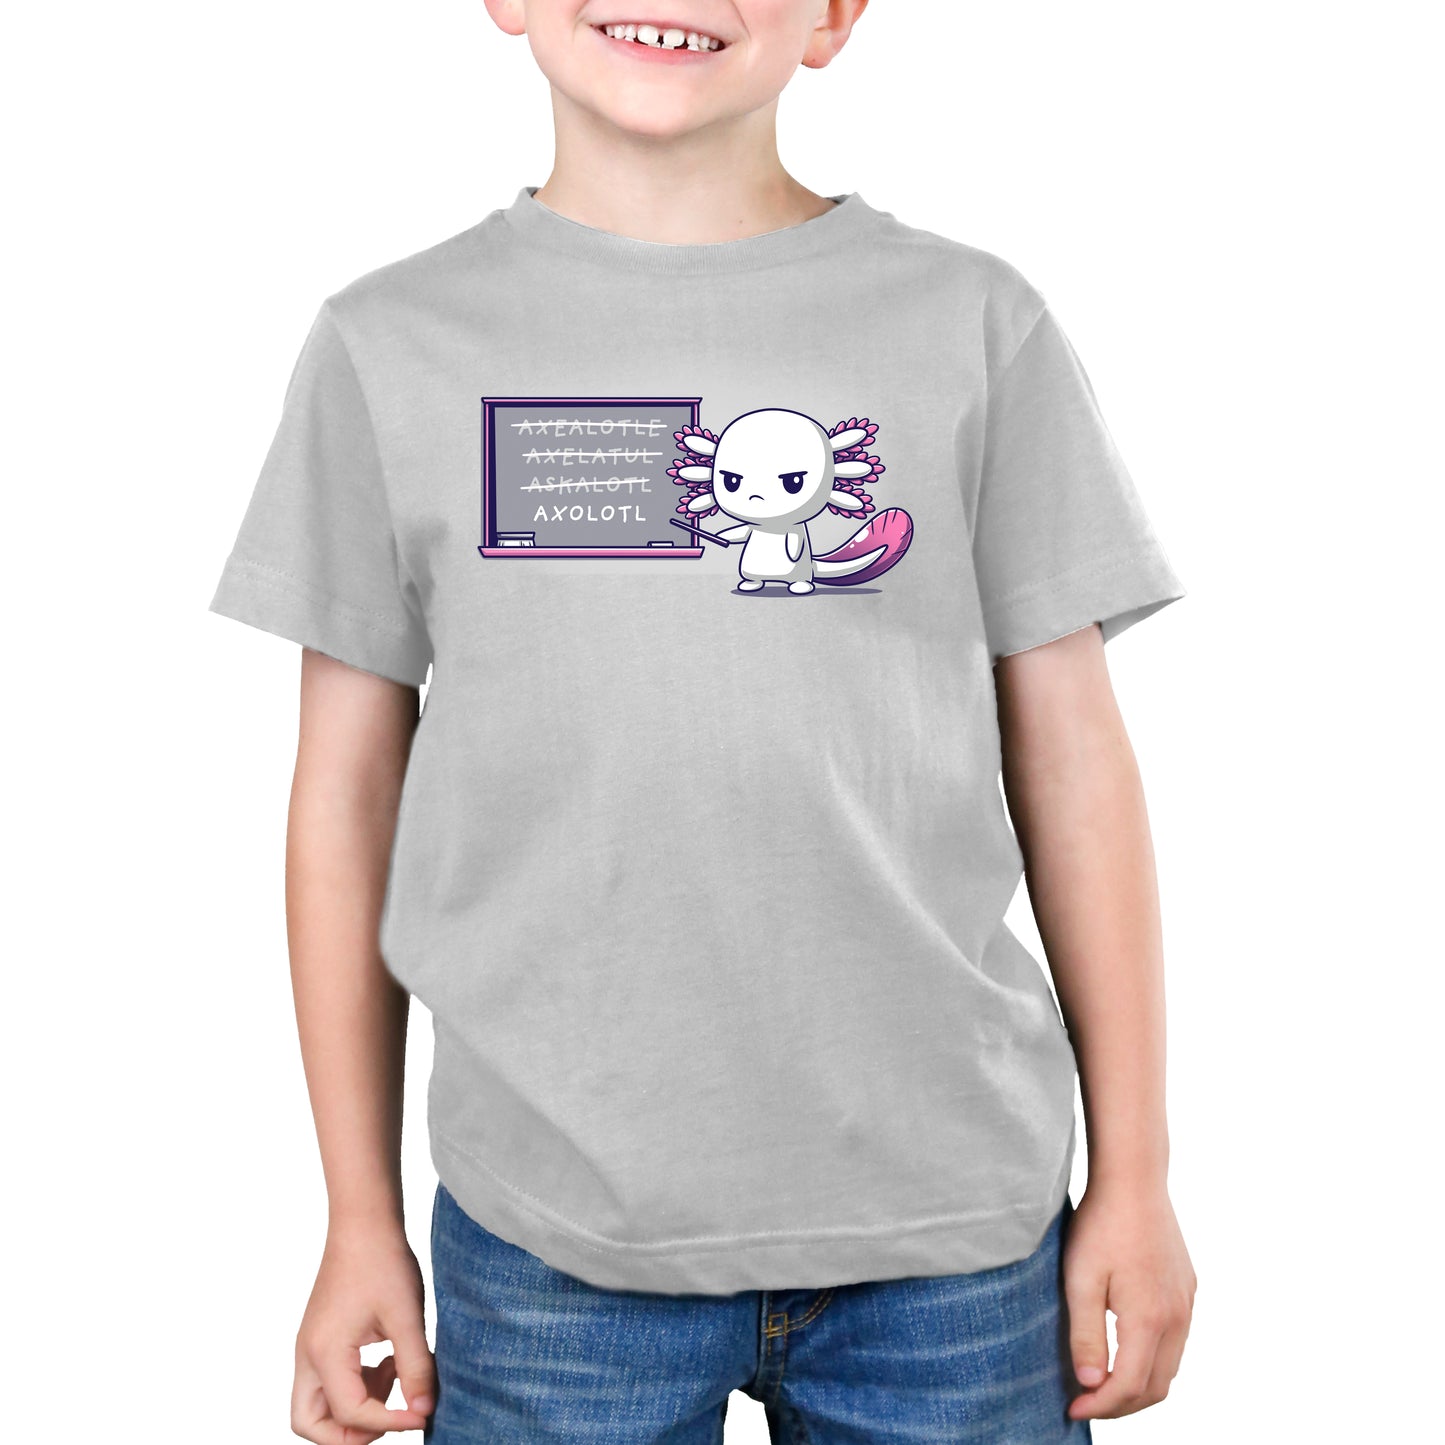 A child wearing a silver monsterdigital t-shirt made from super soft ringspun cotton with a cartoon axolotl character called Axolotl Lesson stands in front of a chalkboard with text on it. The child is smiling and has their hands at their sides.